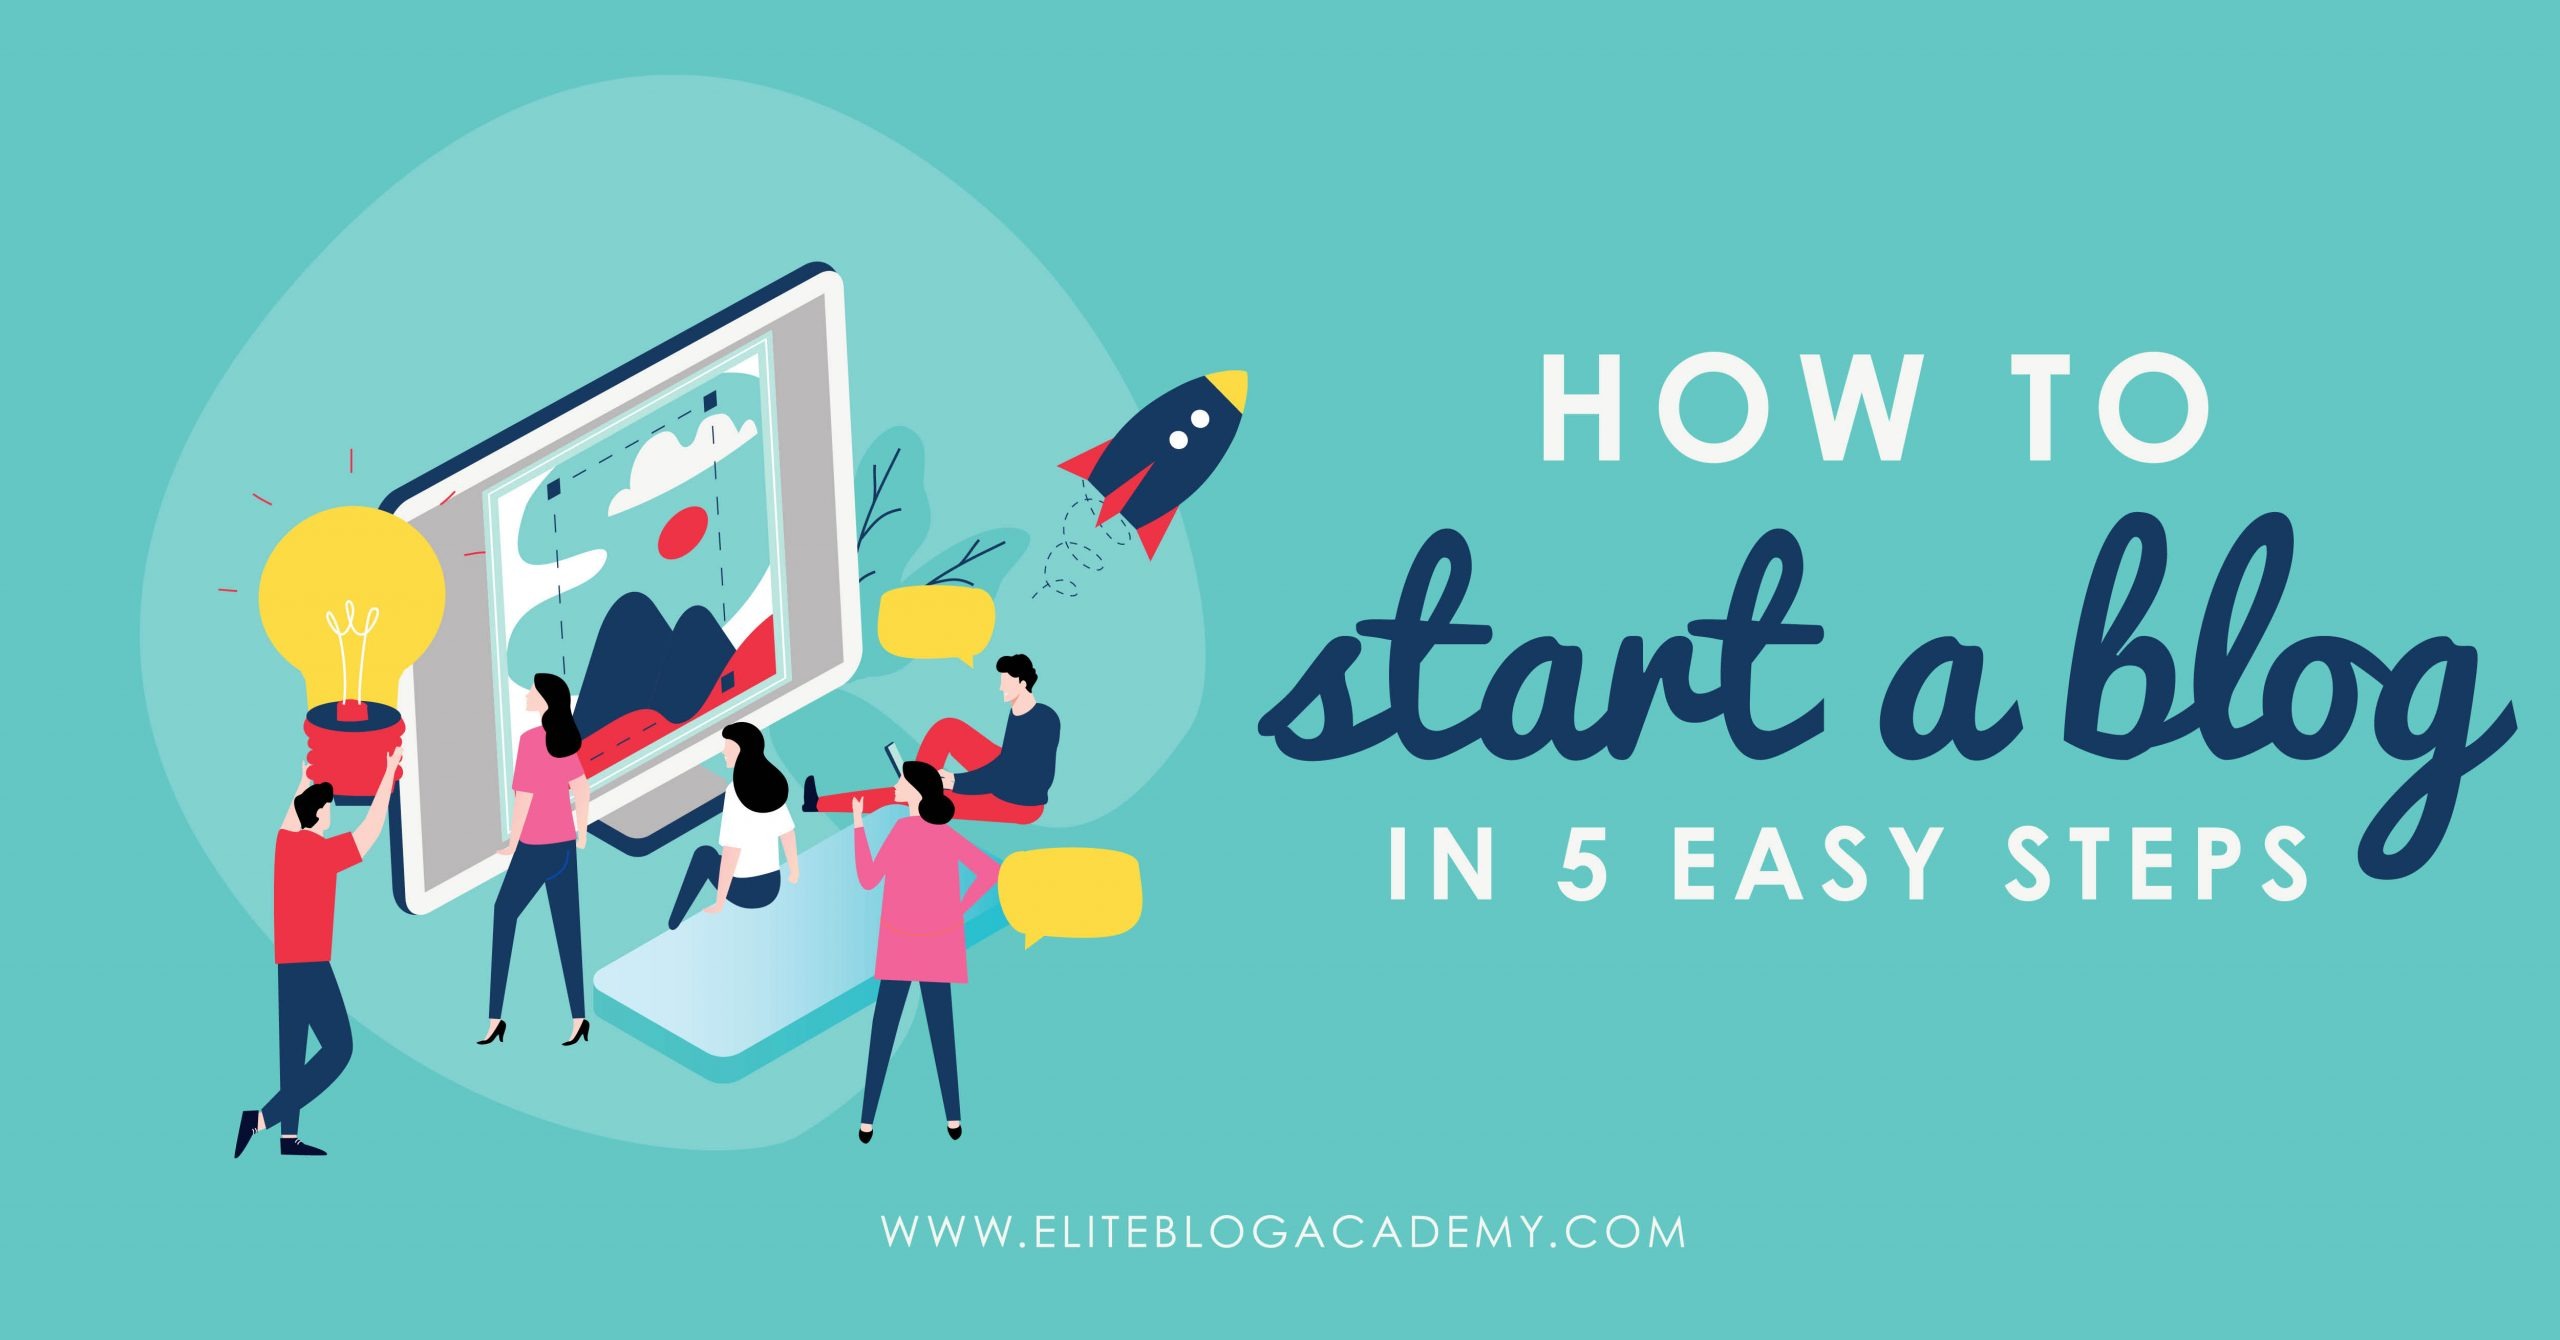 How to Start a Blog in 5 Easy Steps | How to Start a Blog in 2022